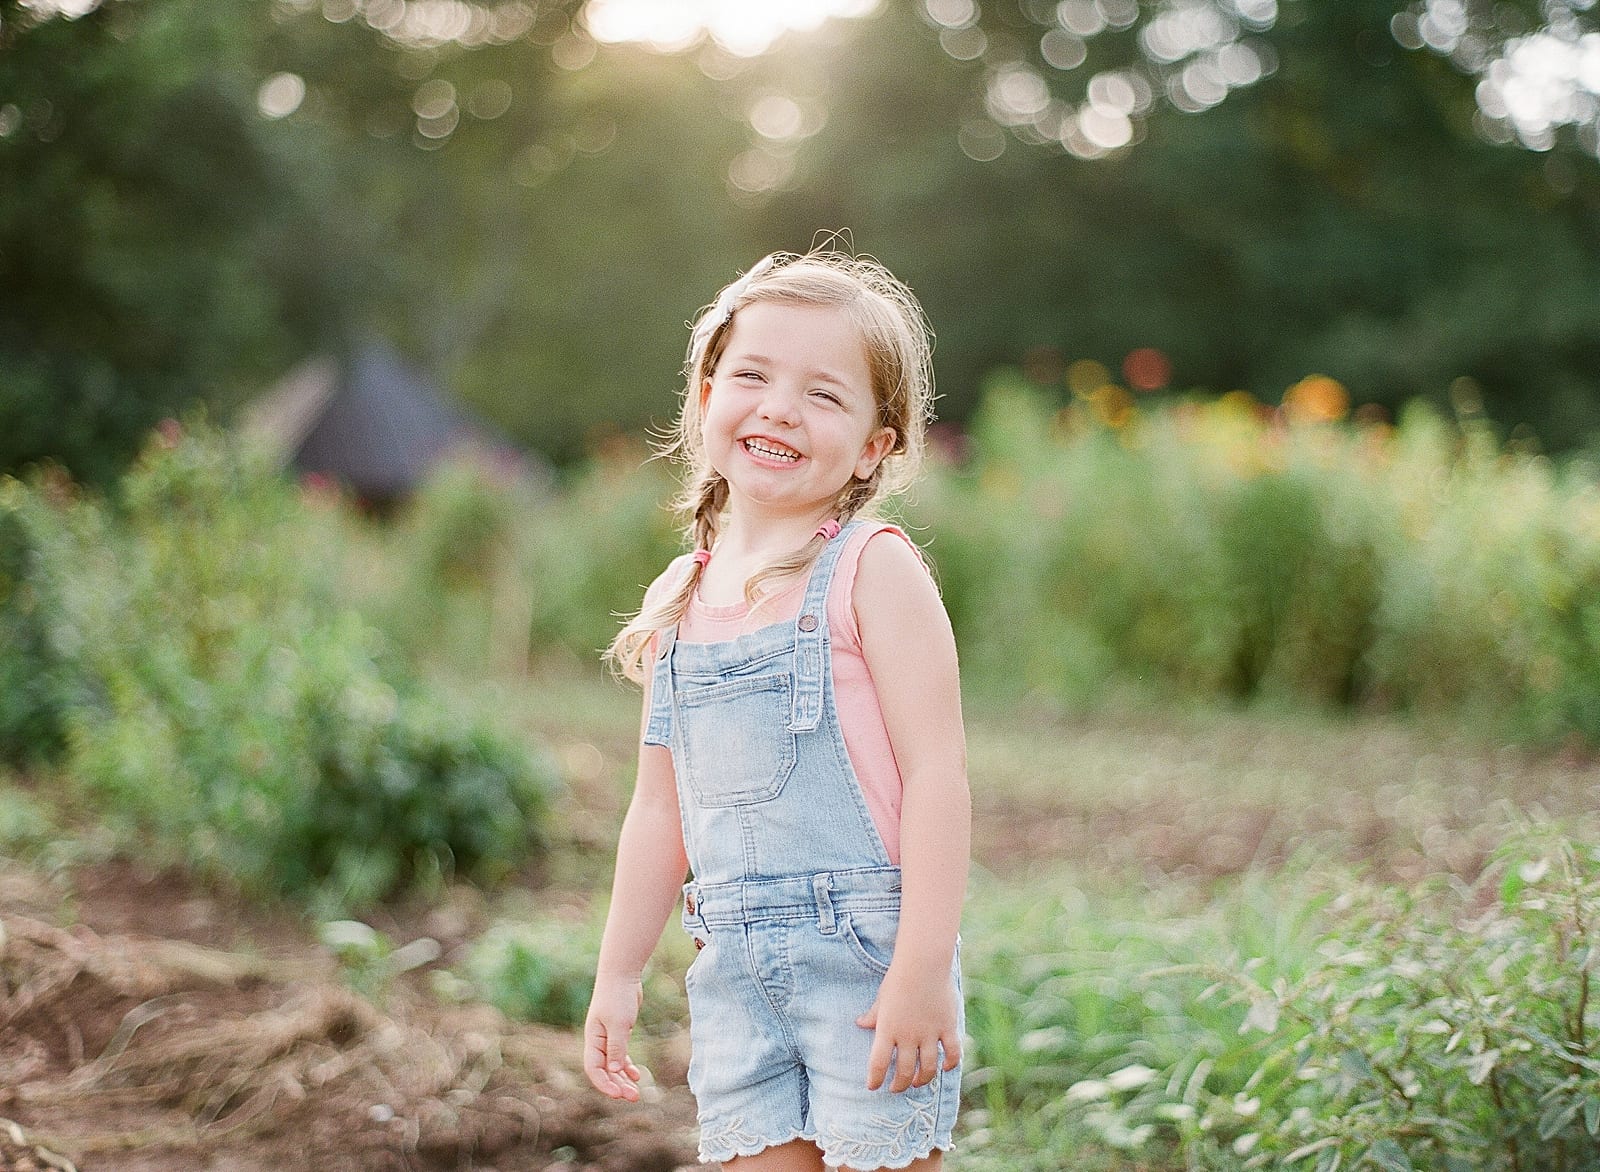 Little Girl In Overalls and Pigtails Laughing at Camera Photo